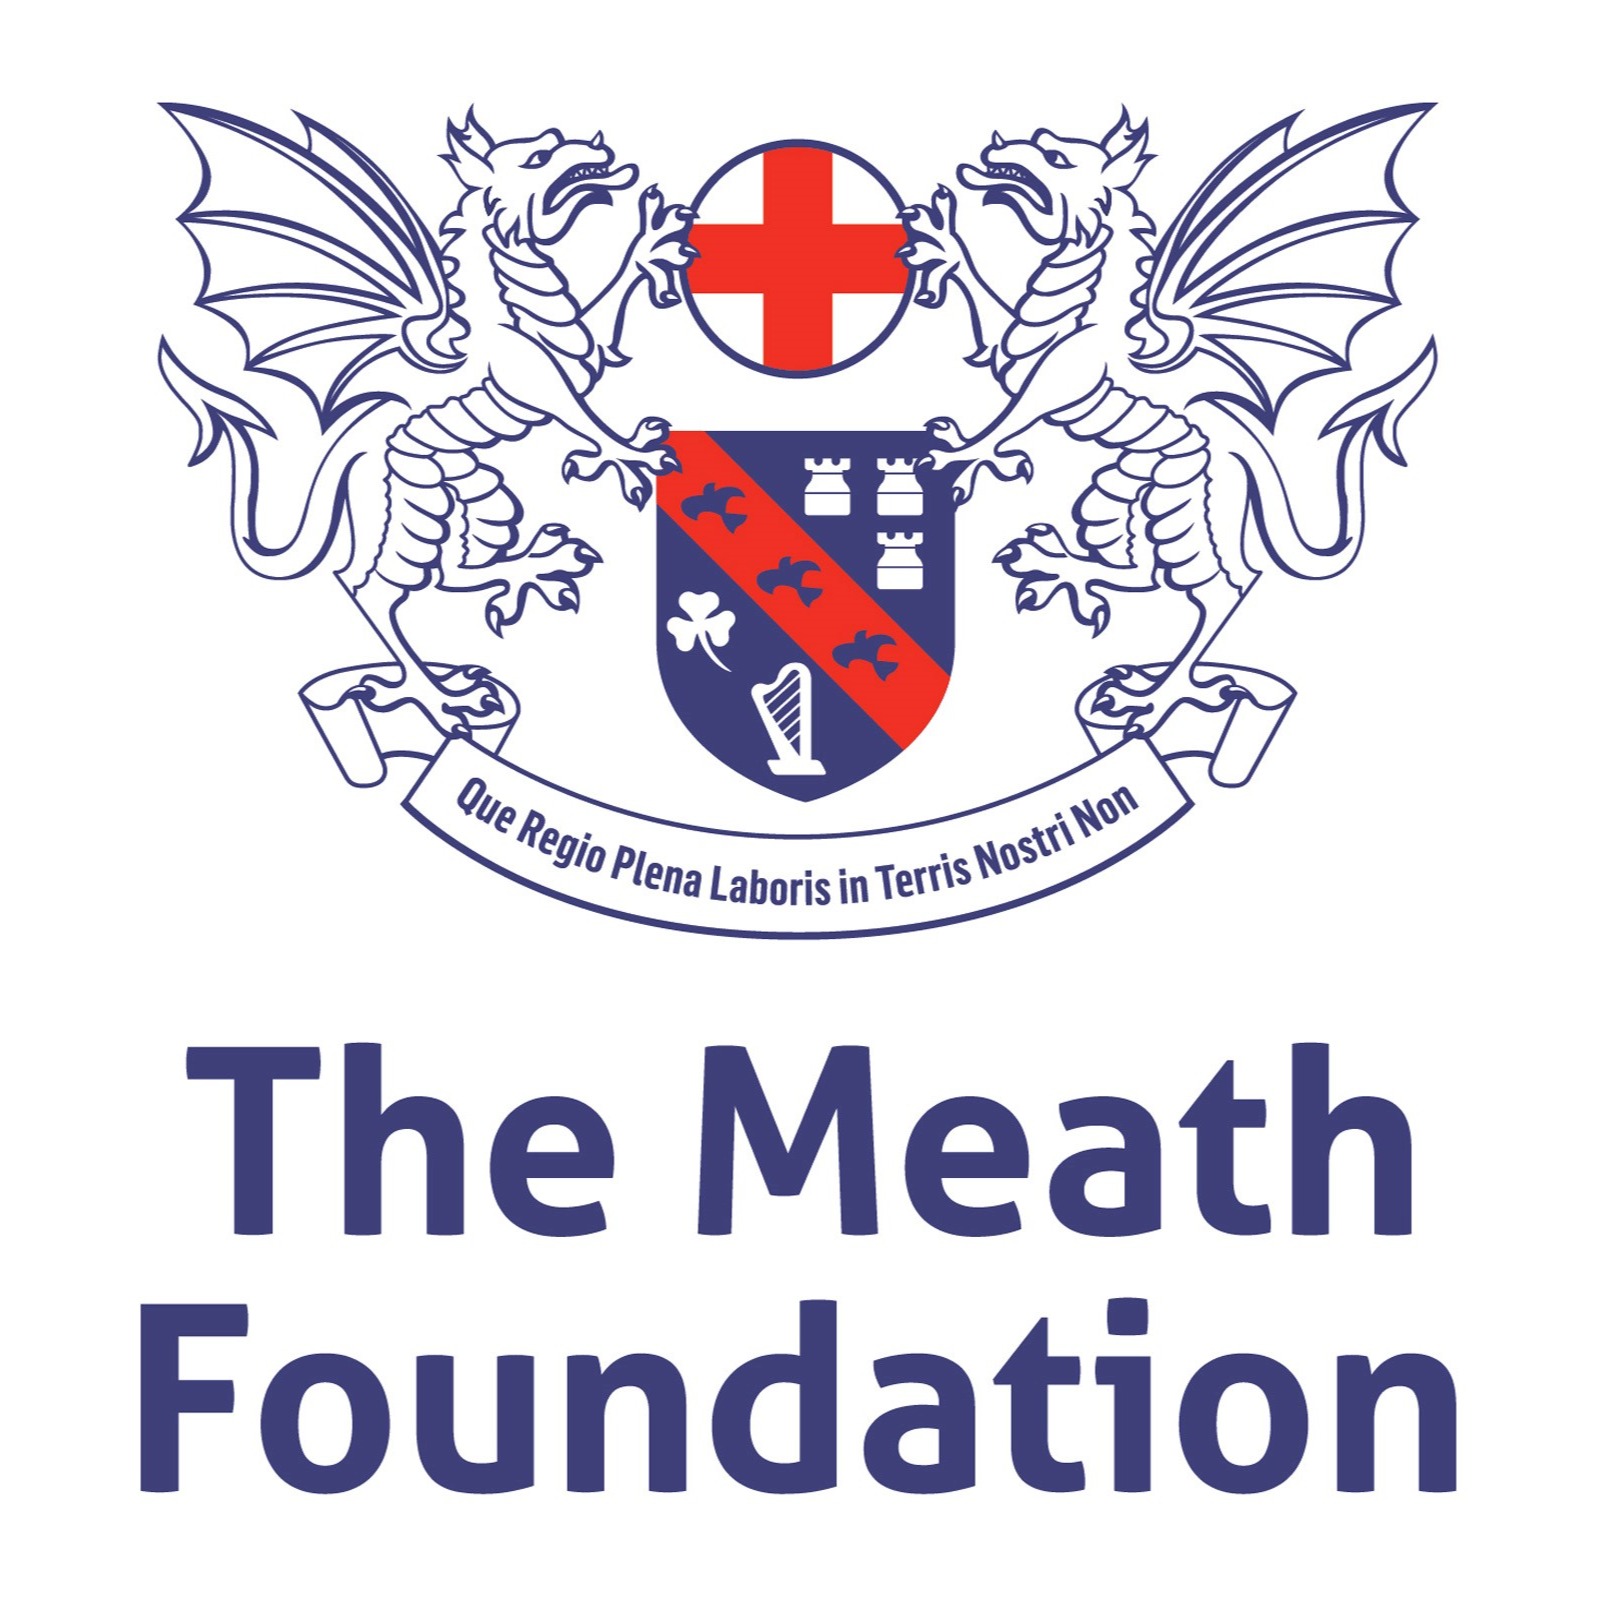 The Meath Foundation